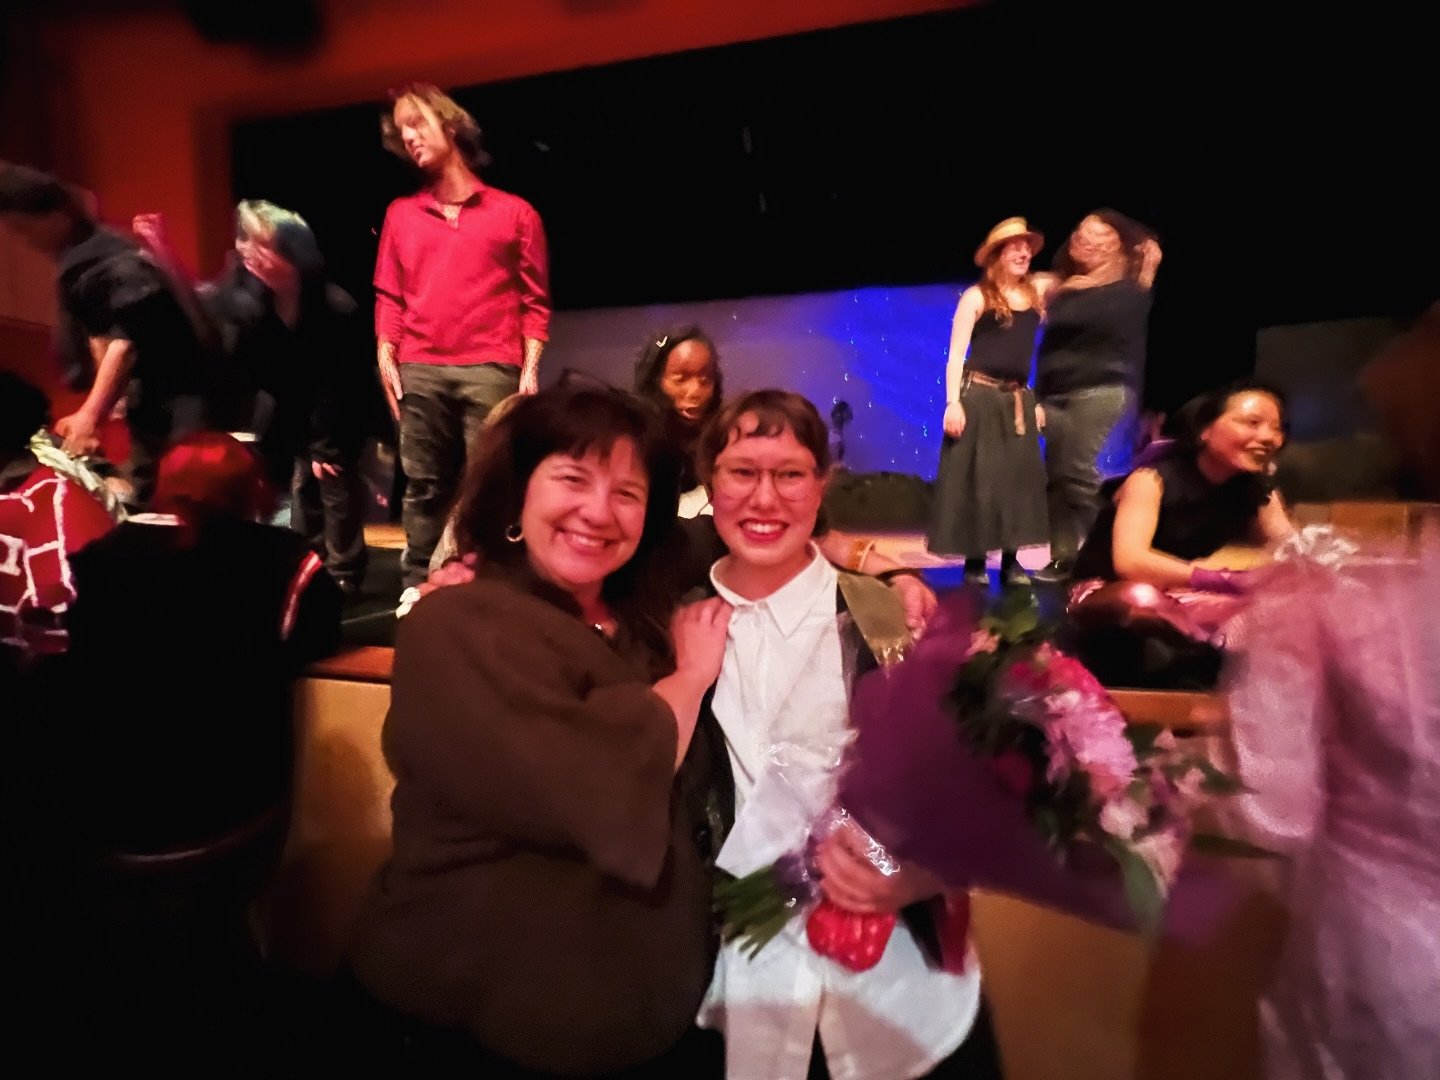 Went to see my godchild Rowan as Peter Quince in Midsummer at Chief Sealth High School- wow! The production was so inventive and there were stunning performances, each kid had a place to shine. And seriously, it was the funniest Pyramus and Thisbe I 